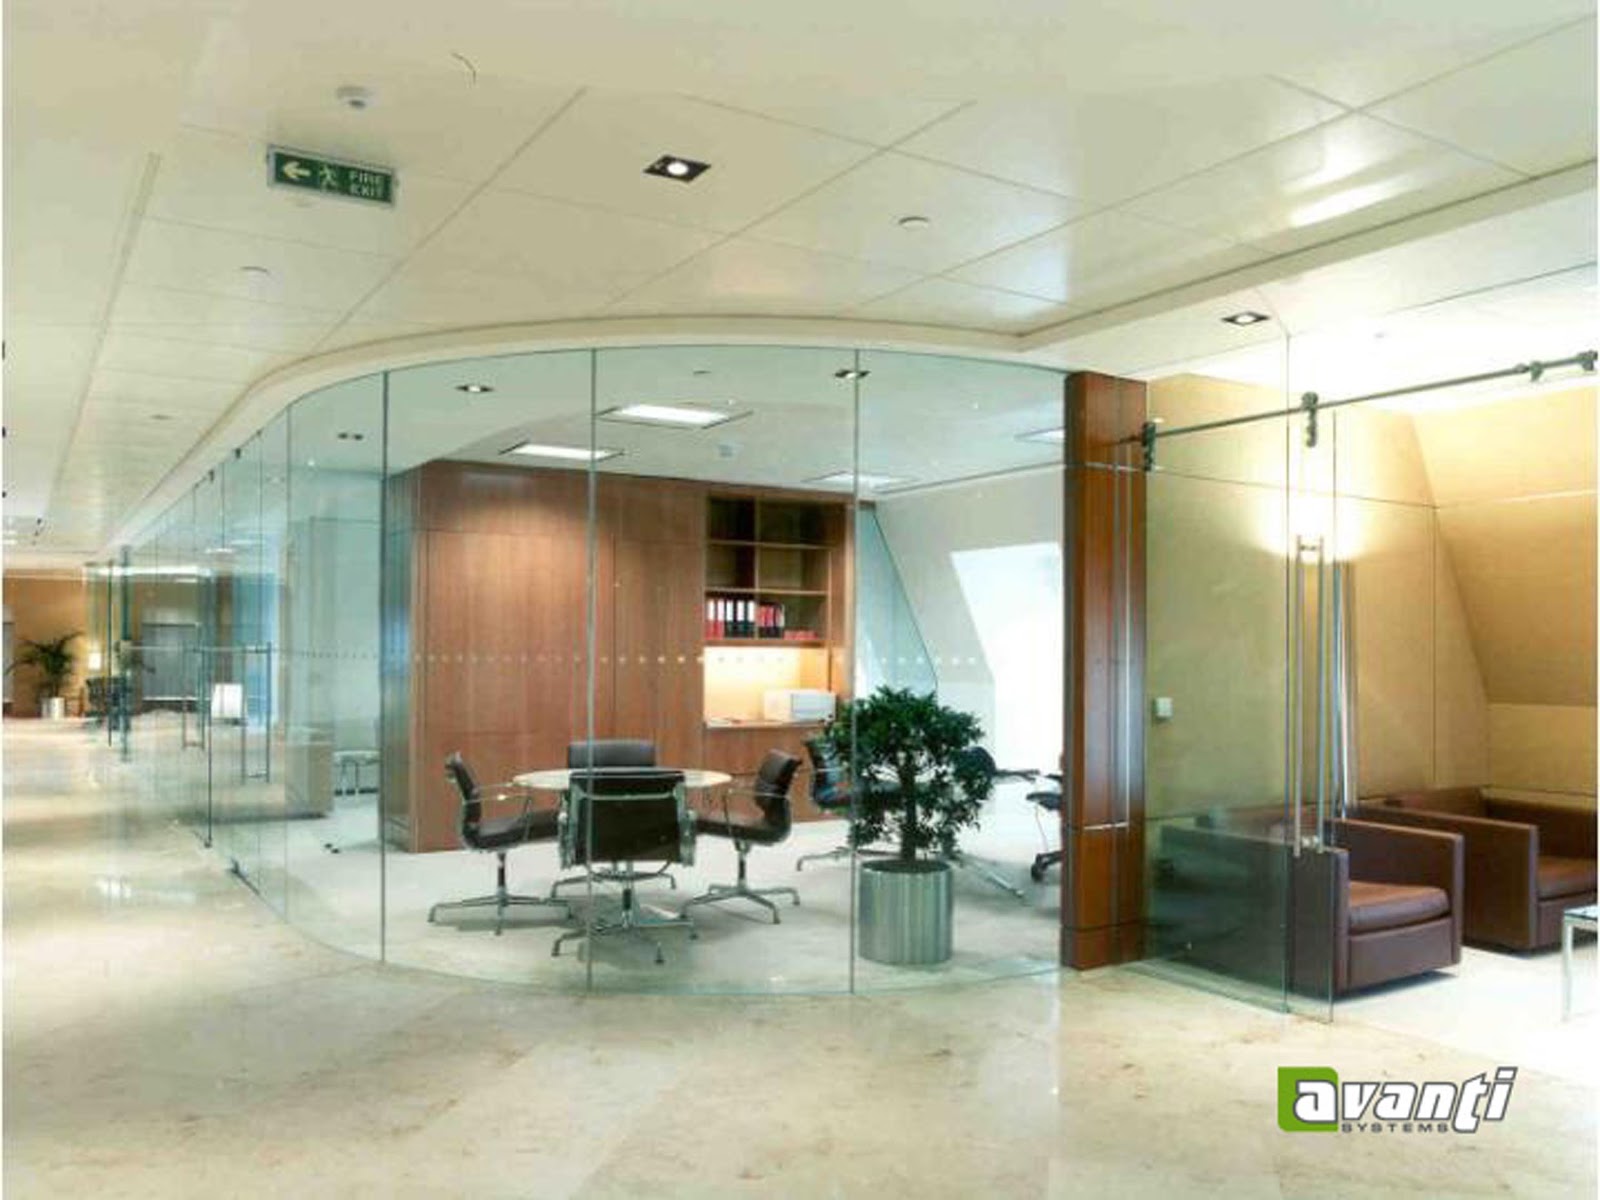 Soften the Design with Rounded Ends - Glass Enclosed Office Space